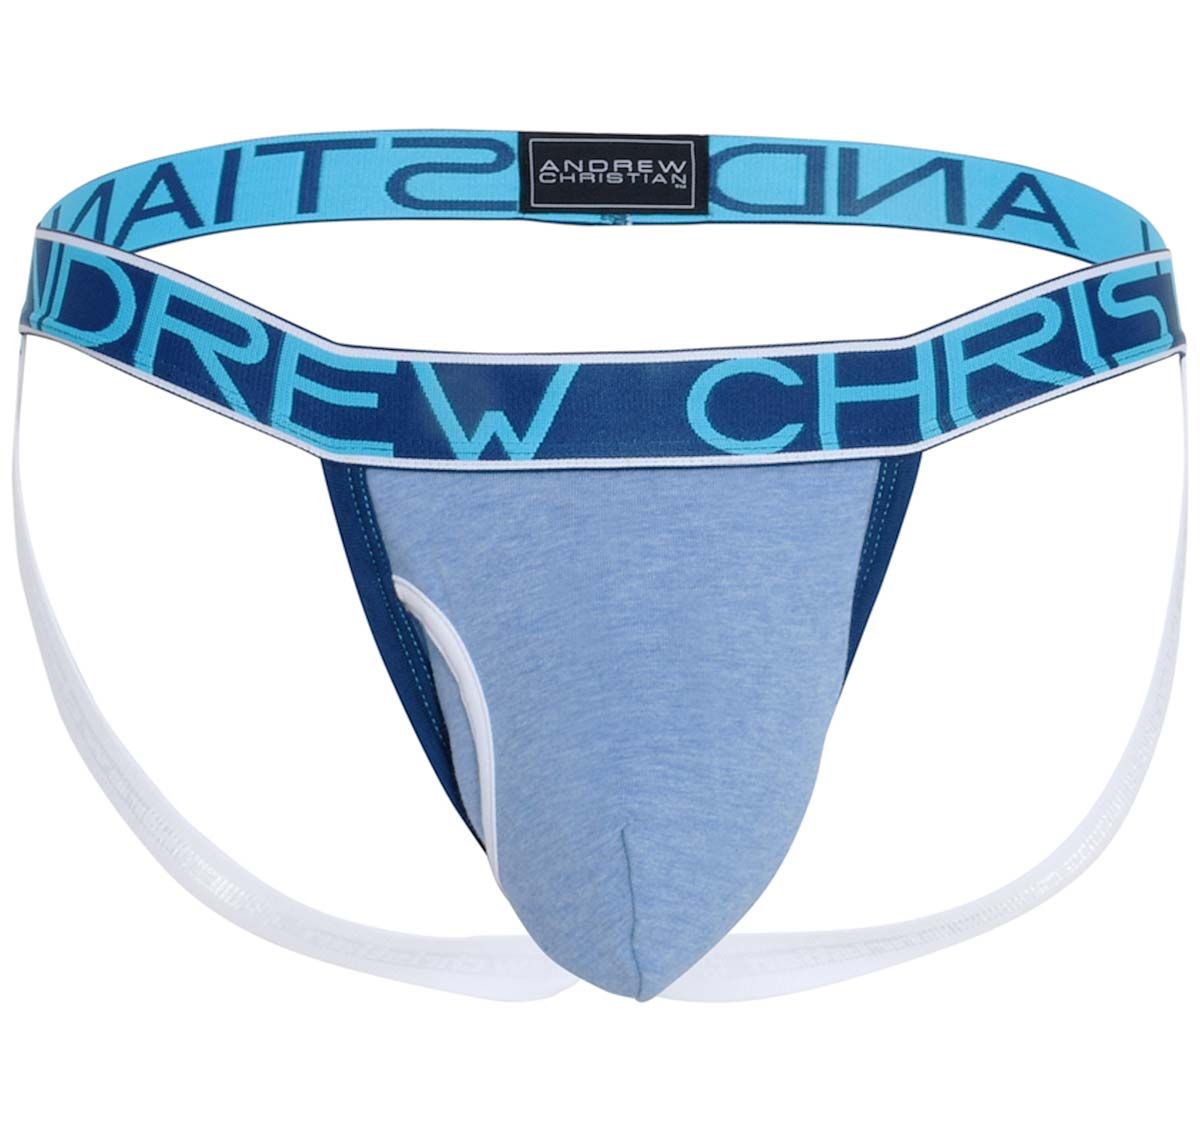 Andrew Christian Suspensorio FLY Jock w/ ALMOST NAKED 92364, azul